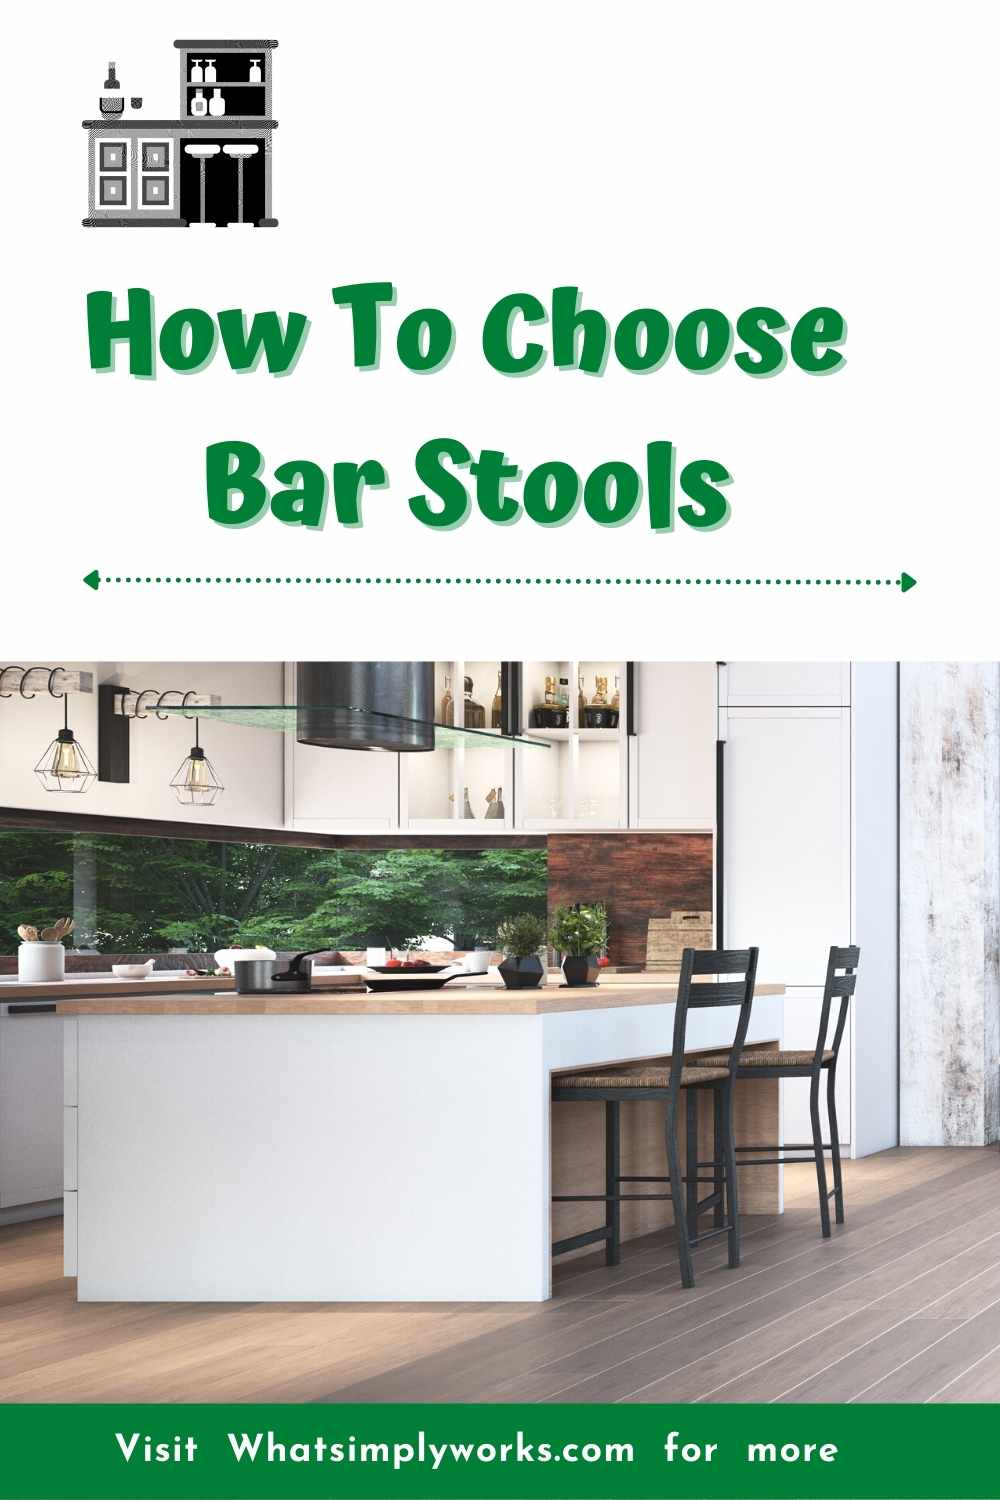 How To Choose Bar Stools and Stock Your Bar